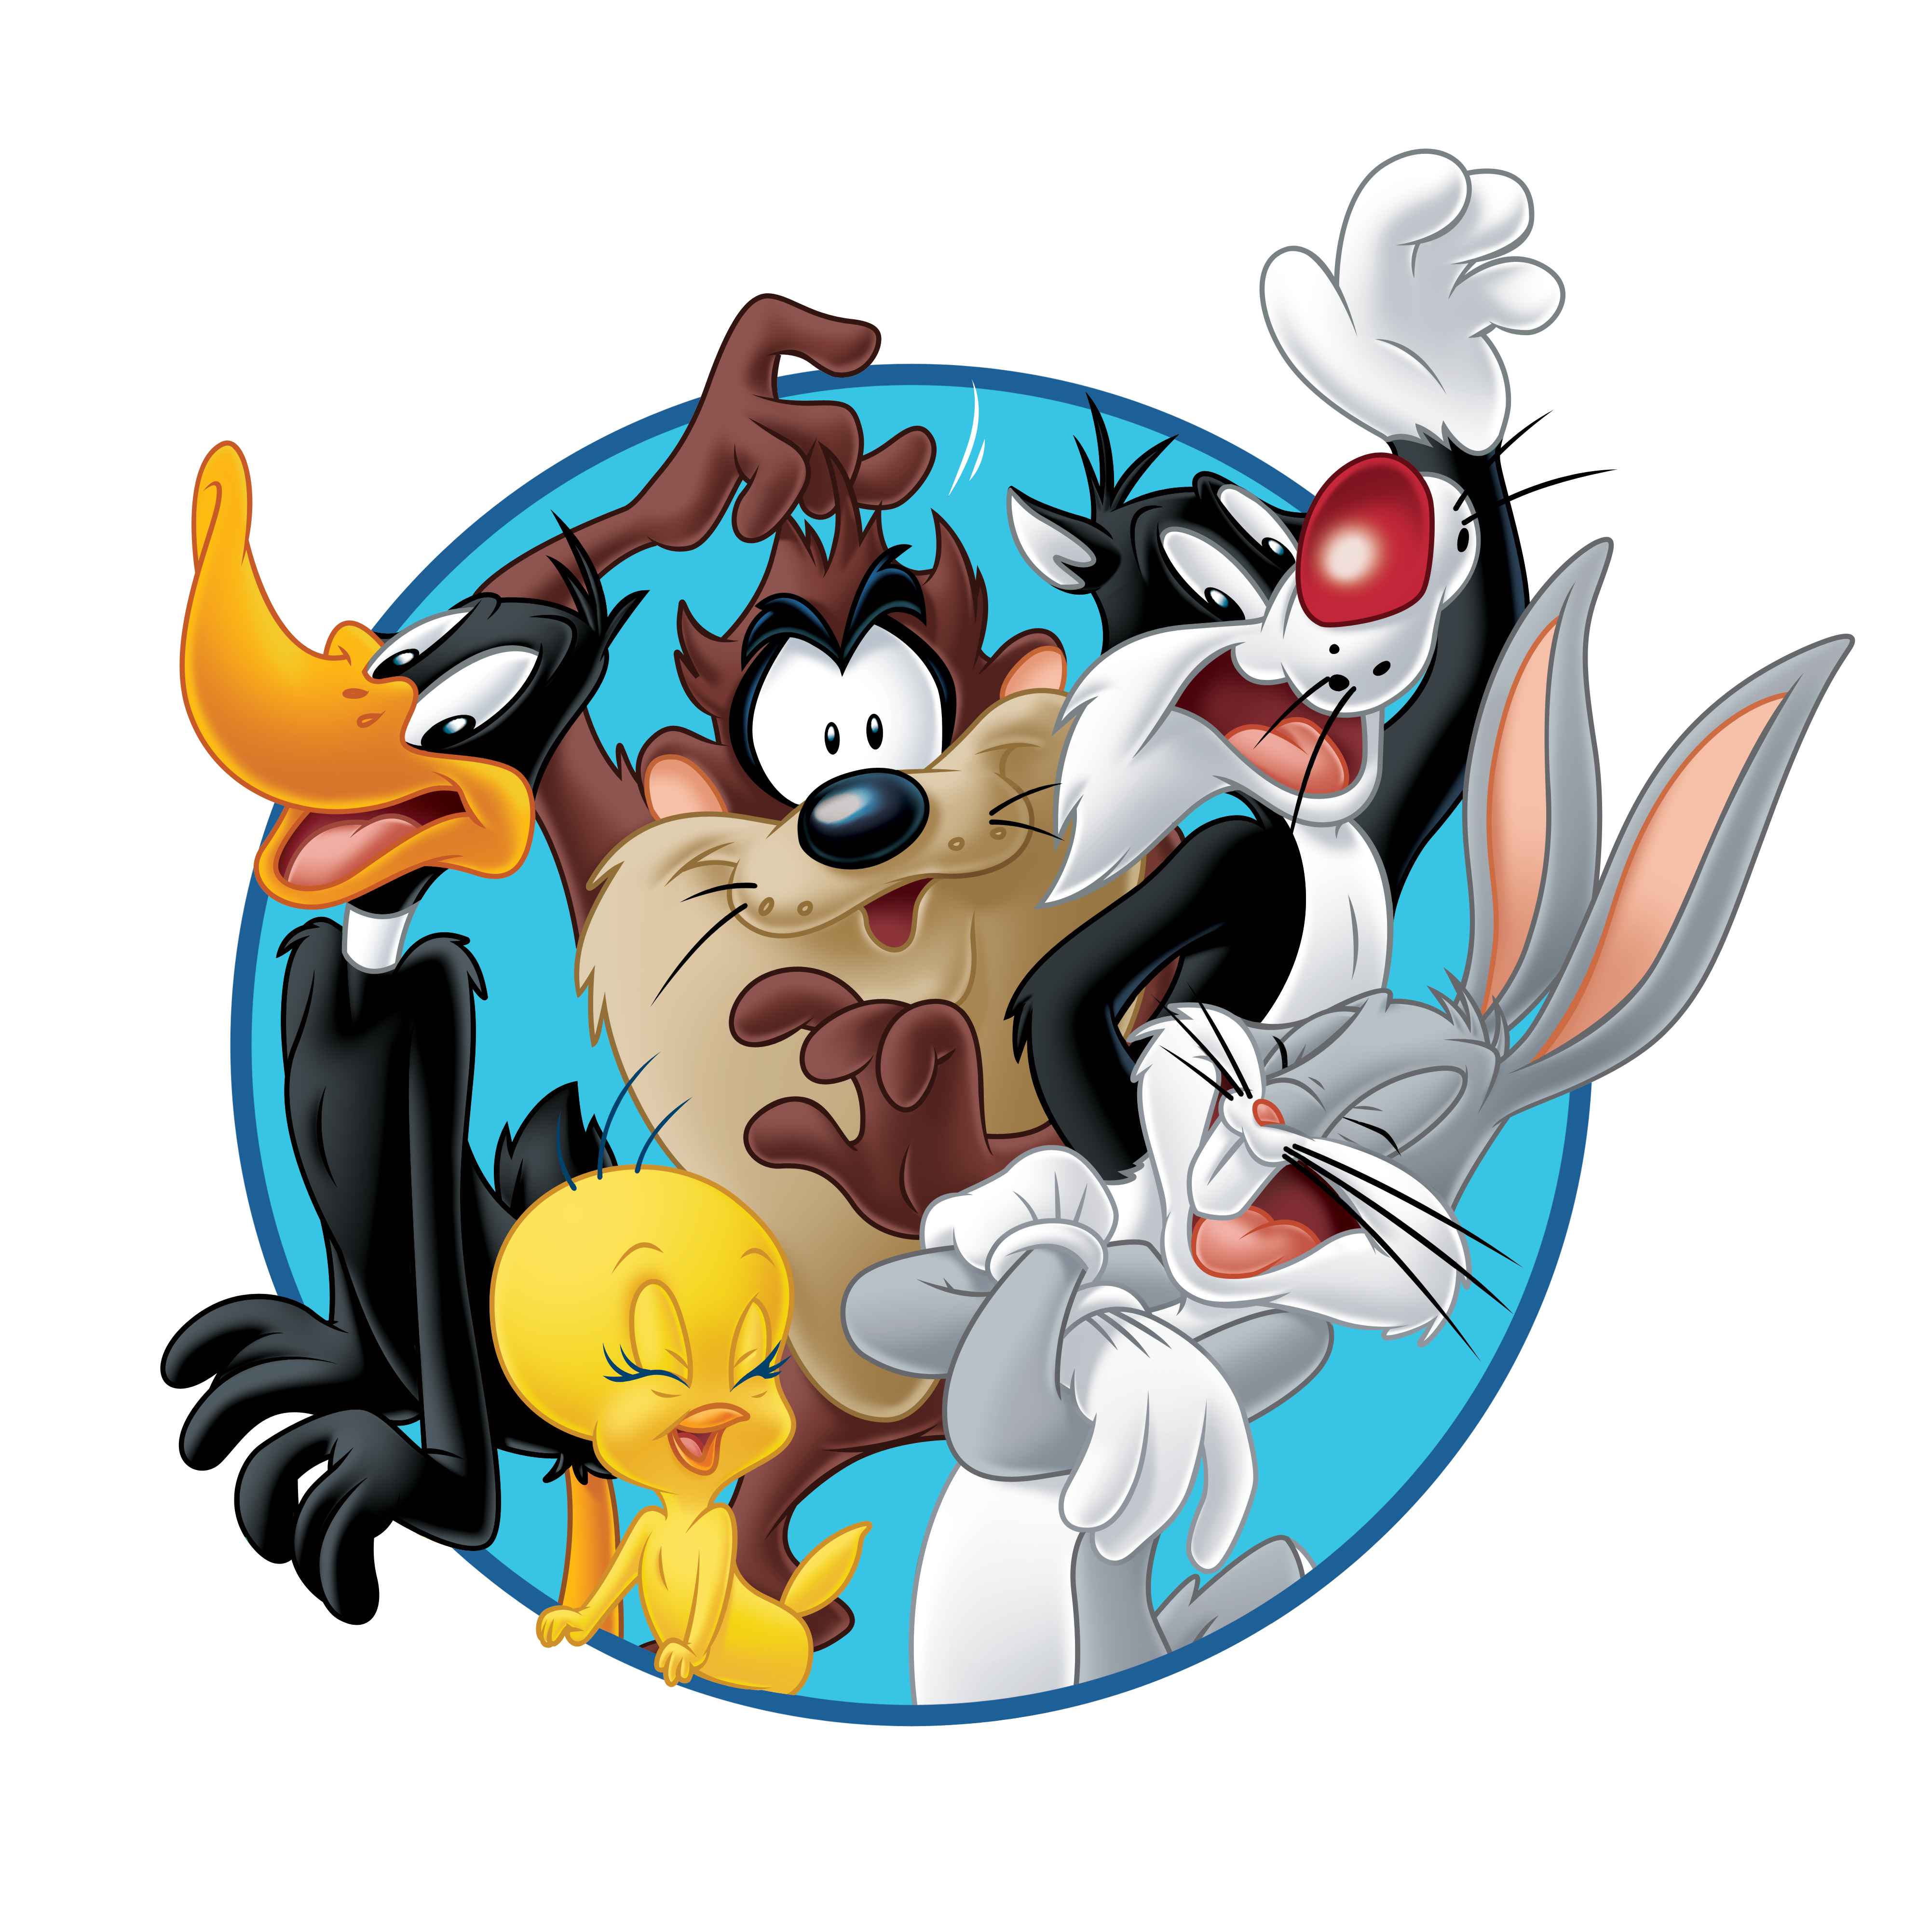 The Looney Tunes Show - Looney Tunes Characters Poster - HD Wallpaper 